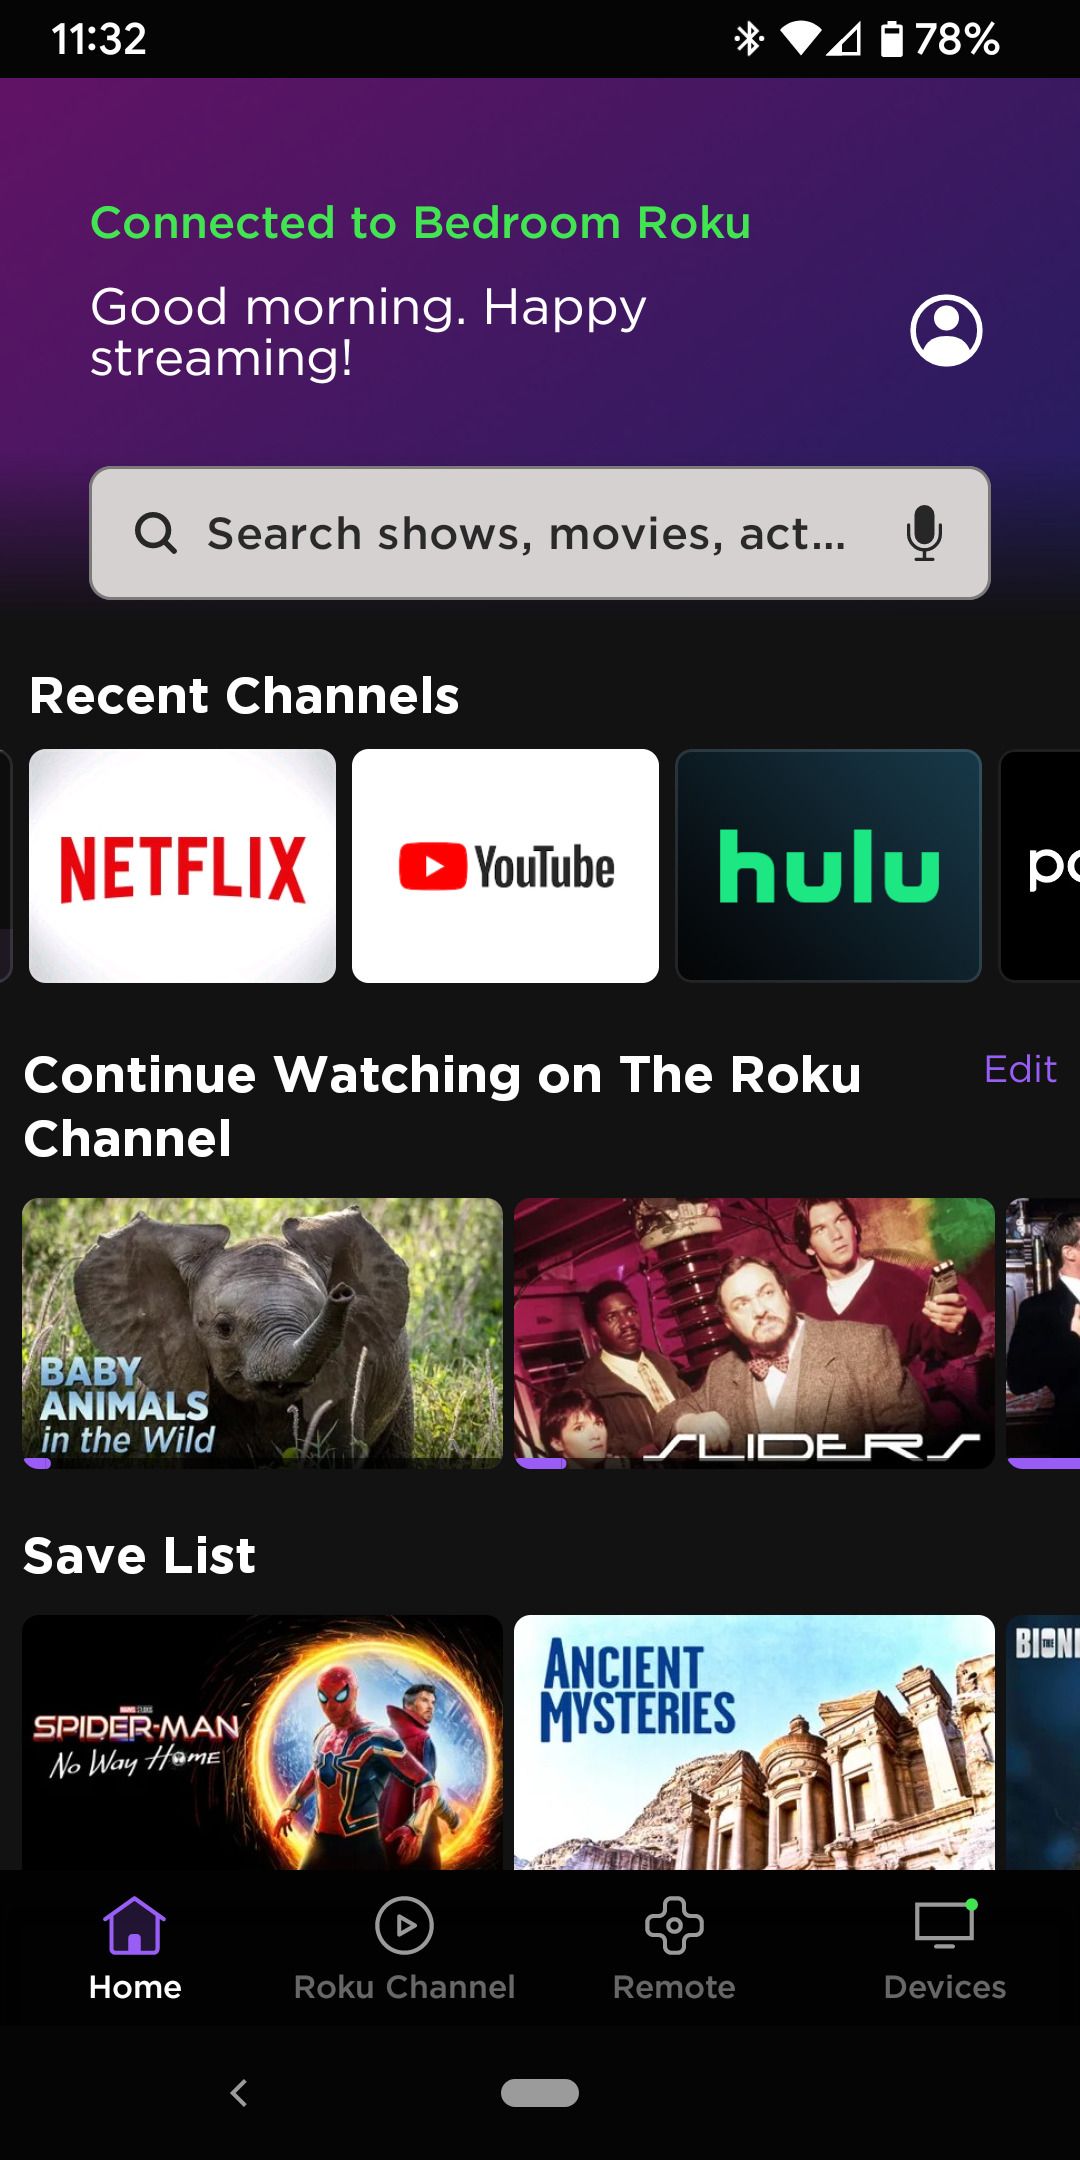 Roku app Home screen with recent channels